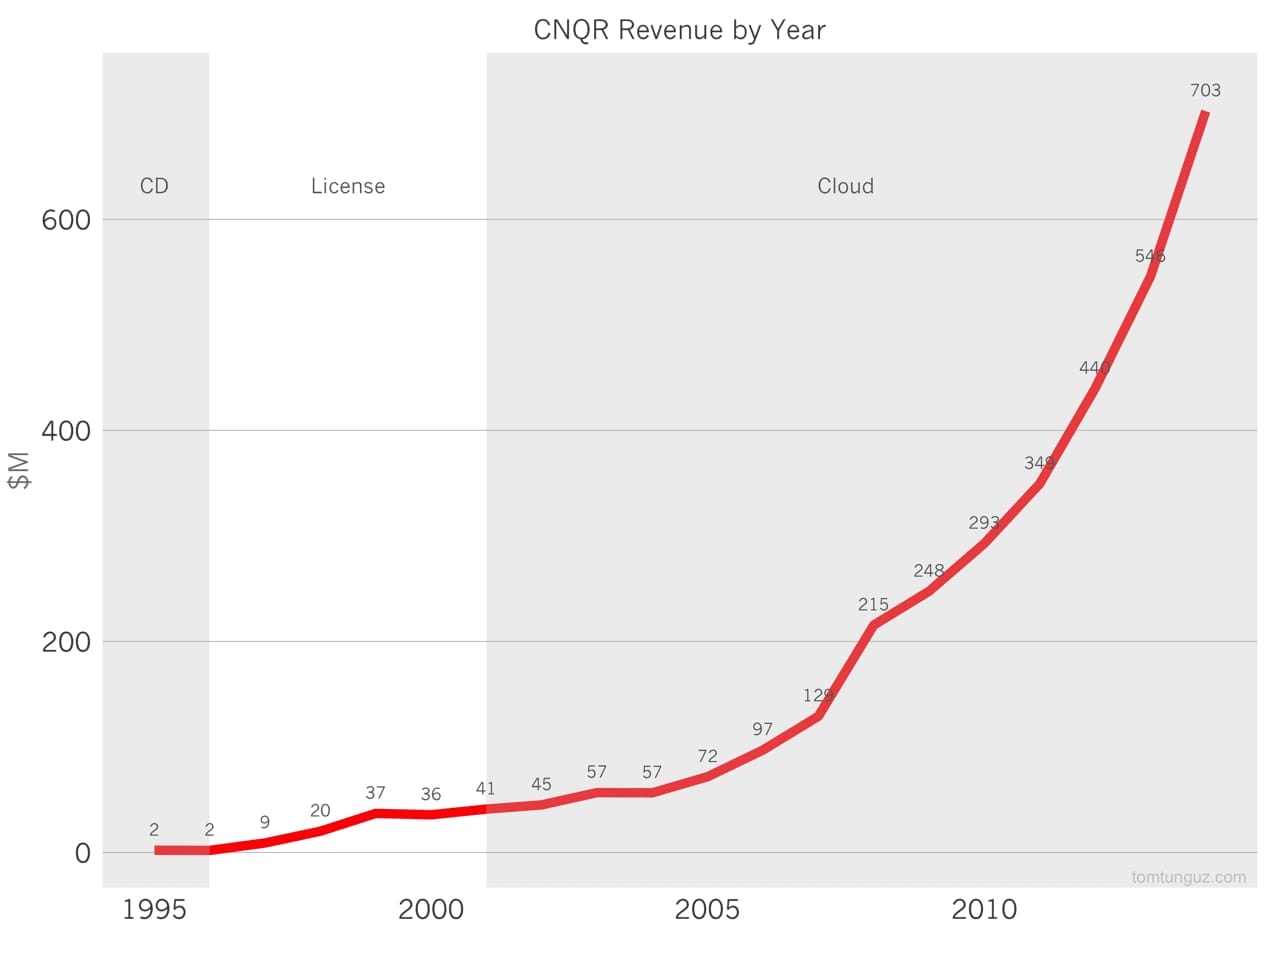 A graph showing the revenue of Concur by year for both licensed and cloud versions.